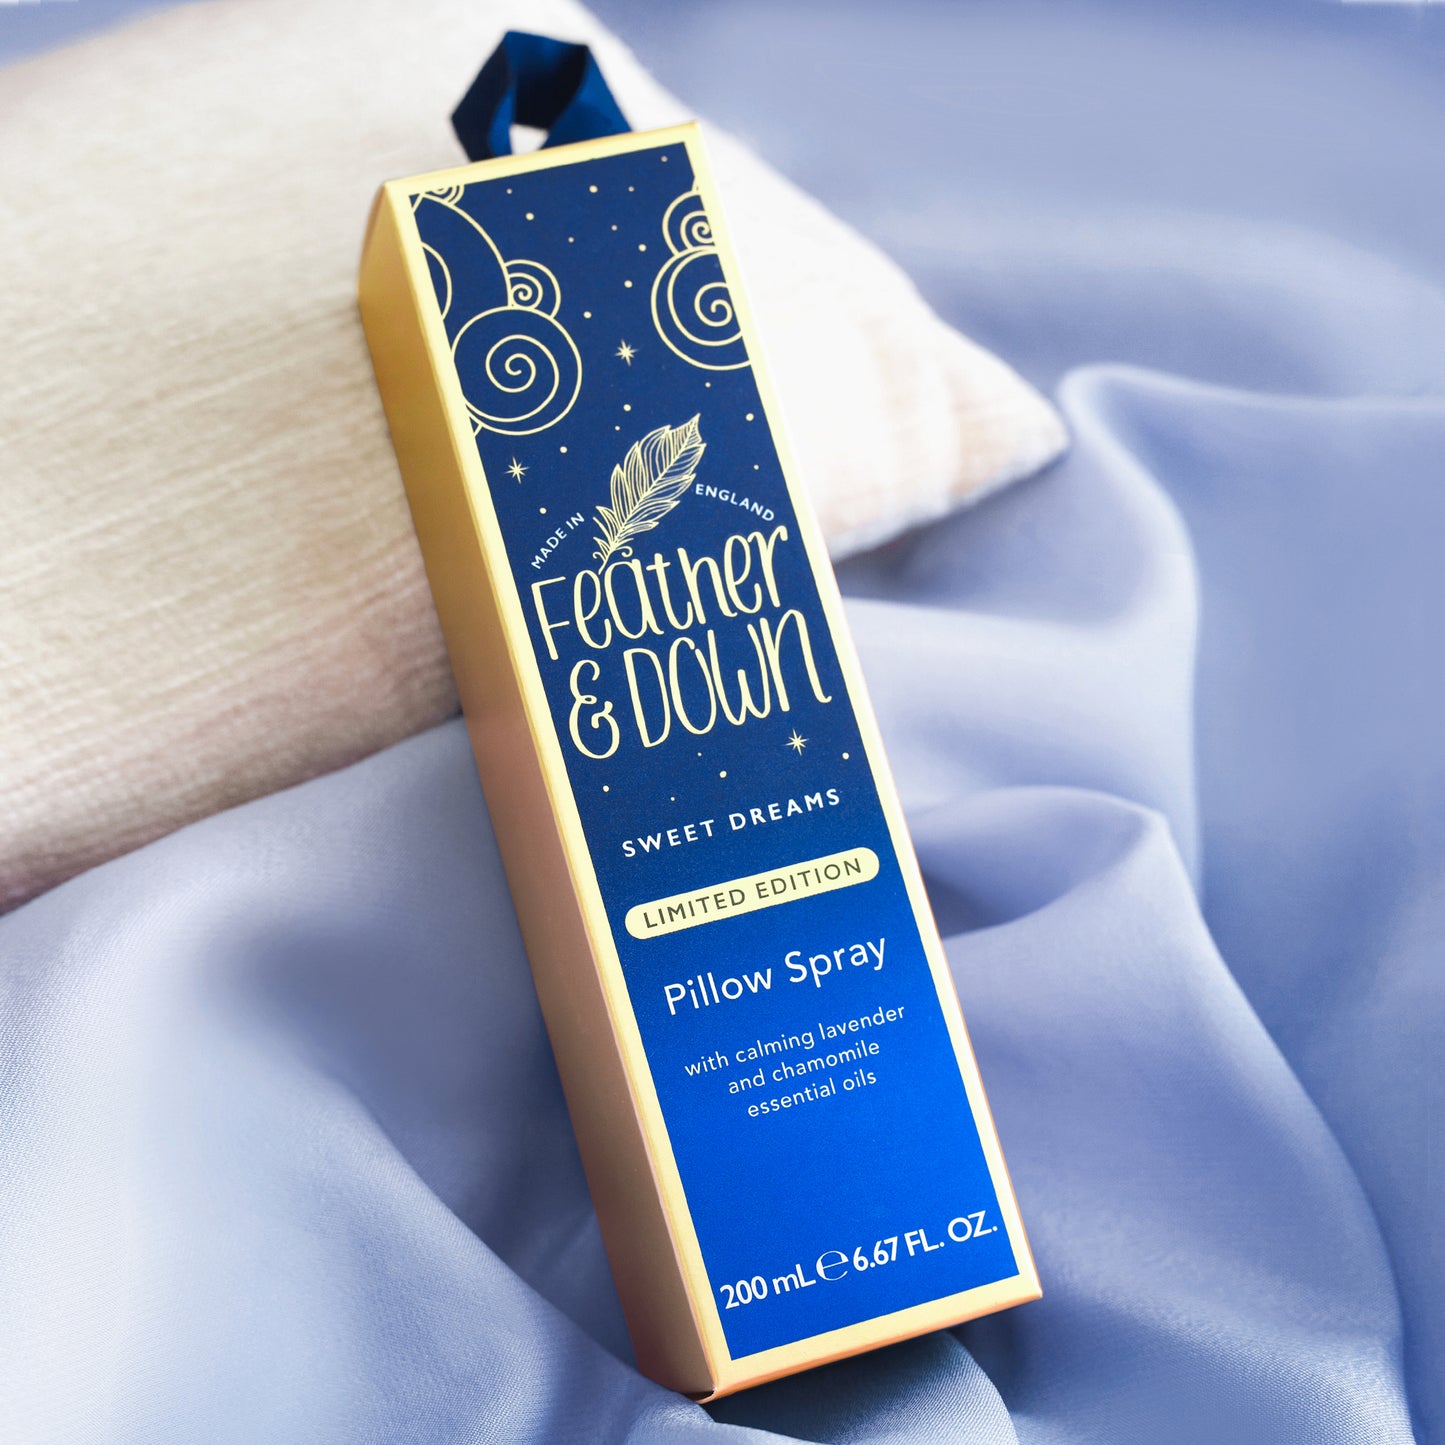 Feather & Down Limited Edition Sweet Dreams Pillow Spray 200ml